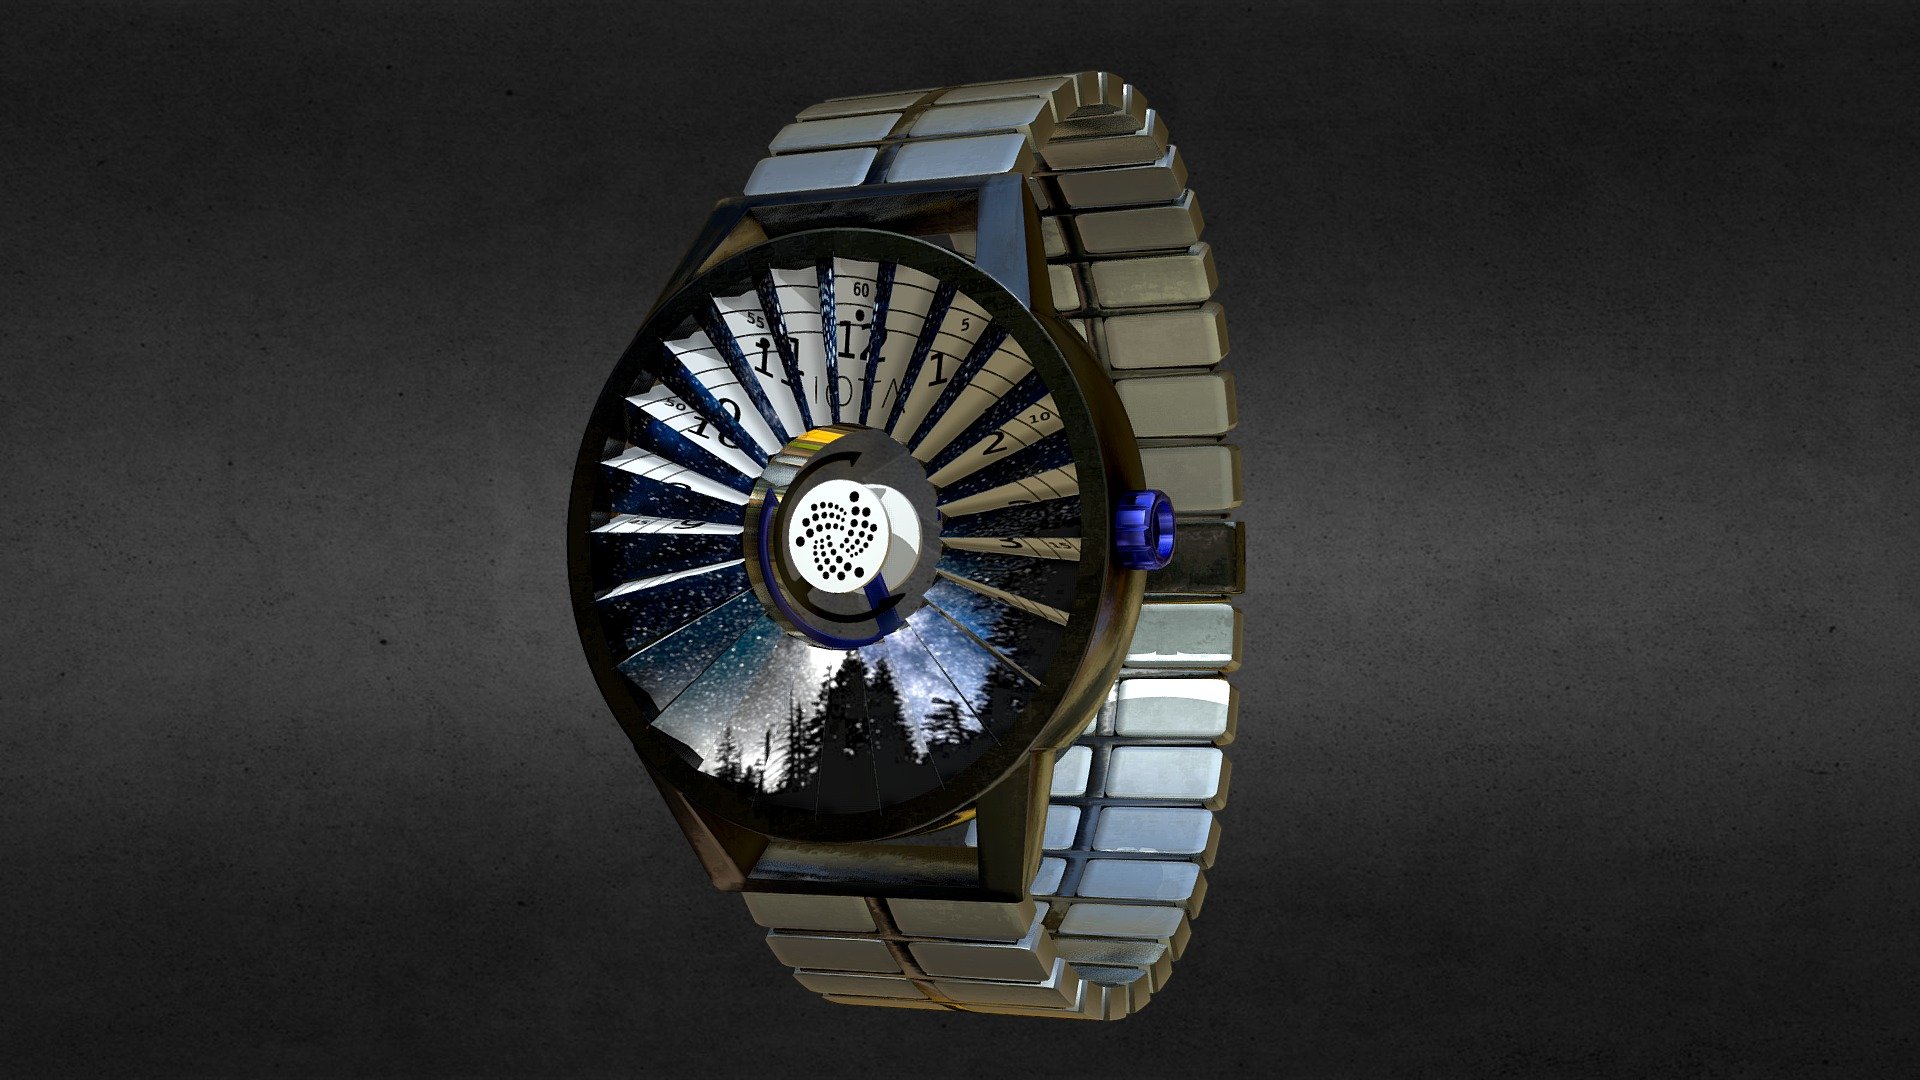 Awesome stainless steel IOTA Coin Watch.

Currently available for download in FBX format.

3D model developed by AR-Watches - IOTA Coin Watch - Buy Royalty Free 3D model by ar-watches 3d model